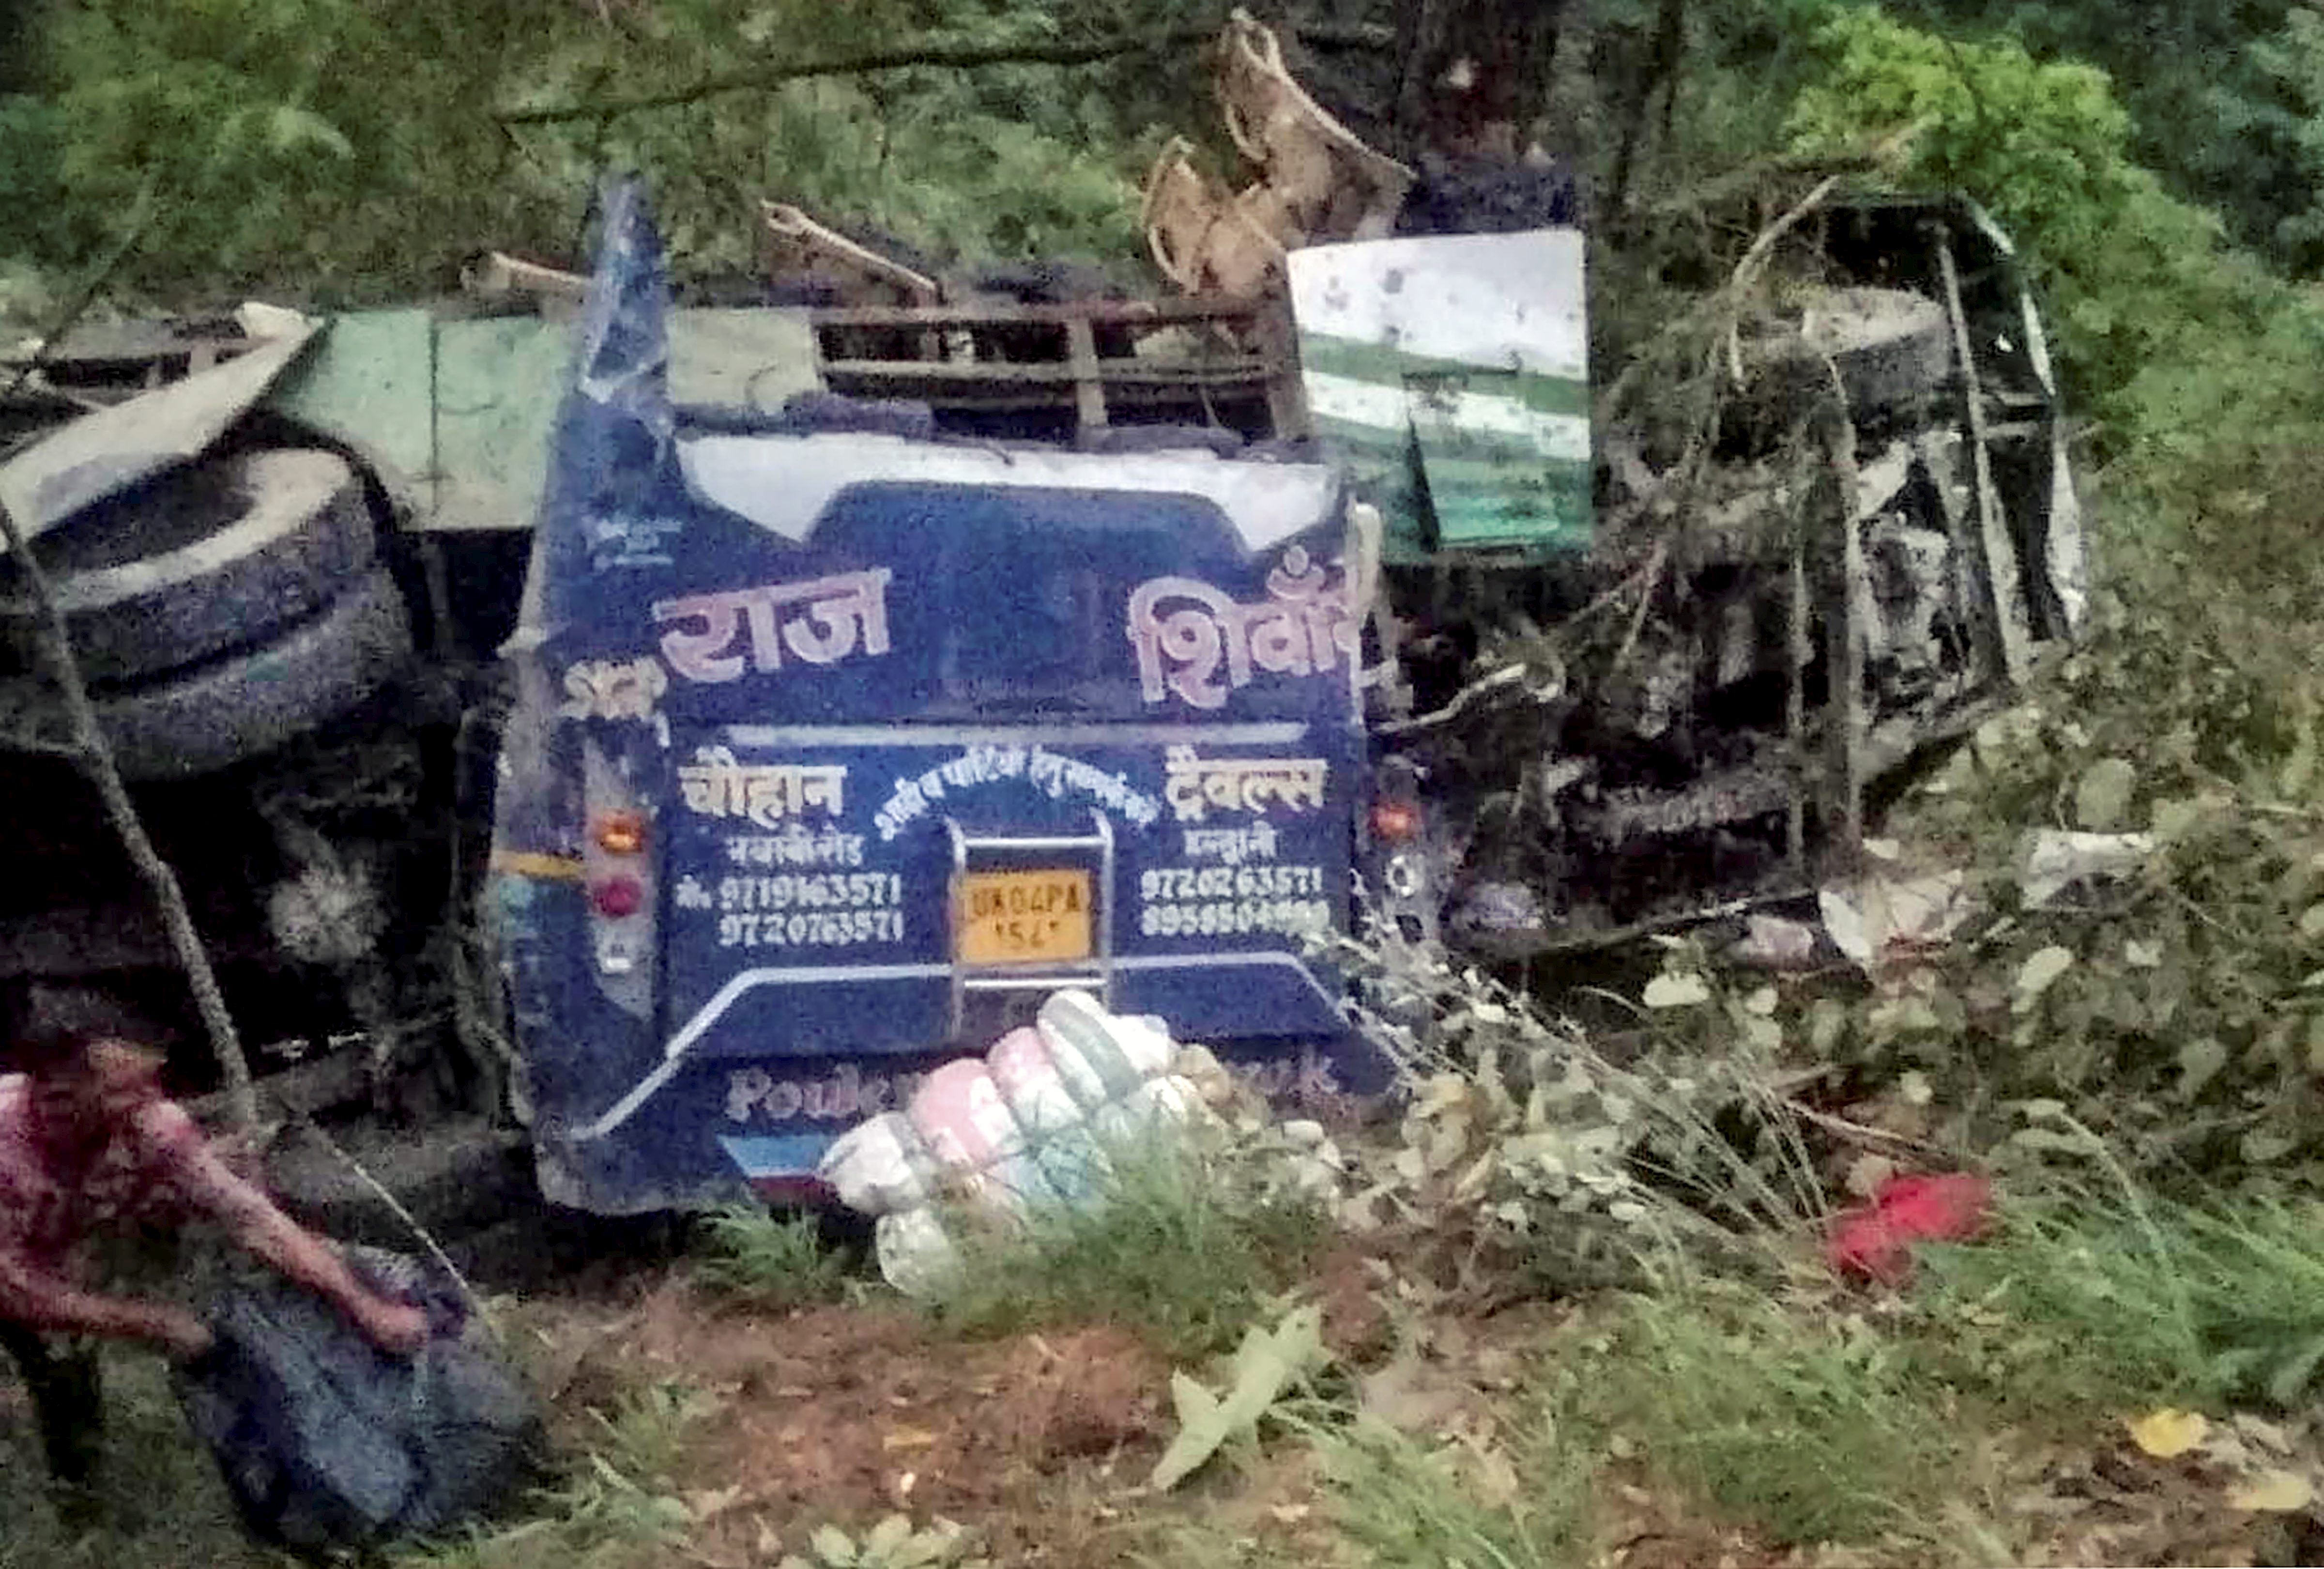 25 pilgrims killed as bus falls into gorge on way to Yamunotri in Uttarakhand